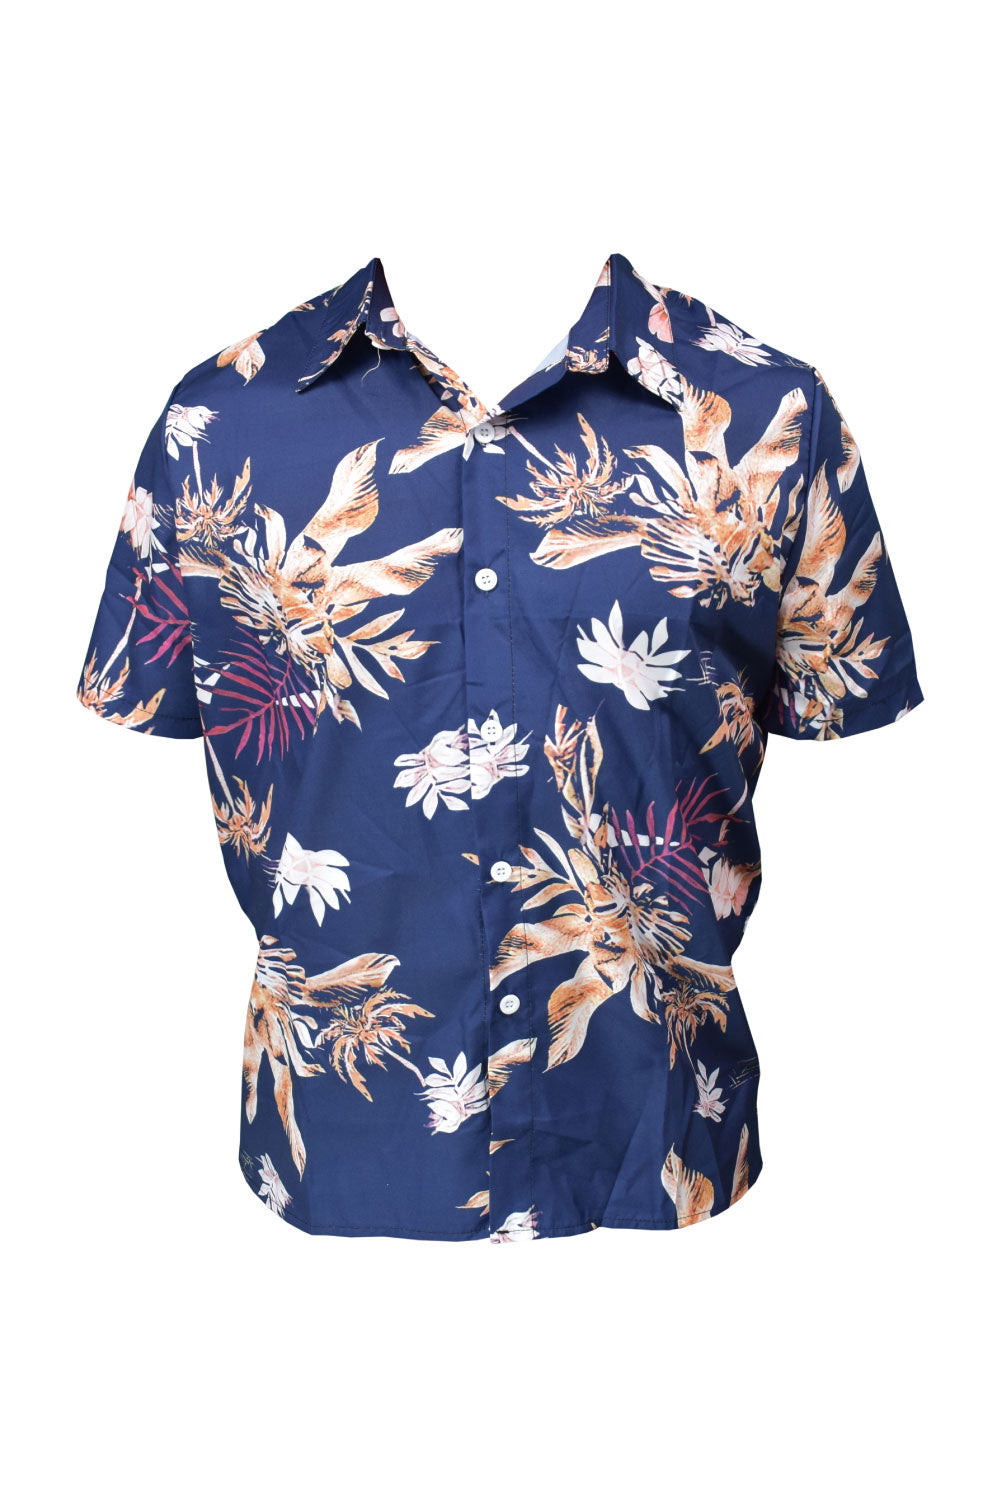 Image of the front of the Palm Leaves Hawaiian Men's Shirt.